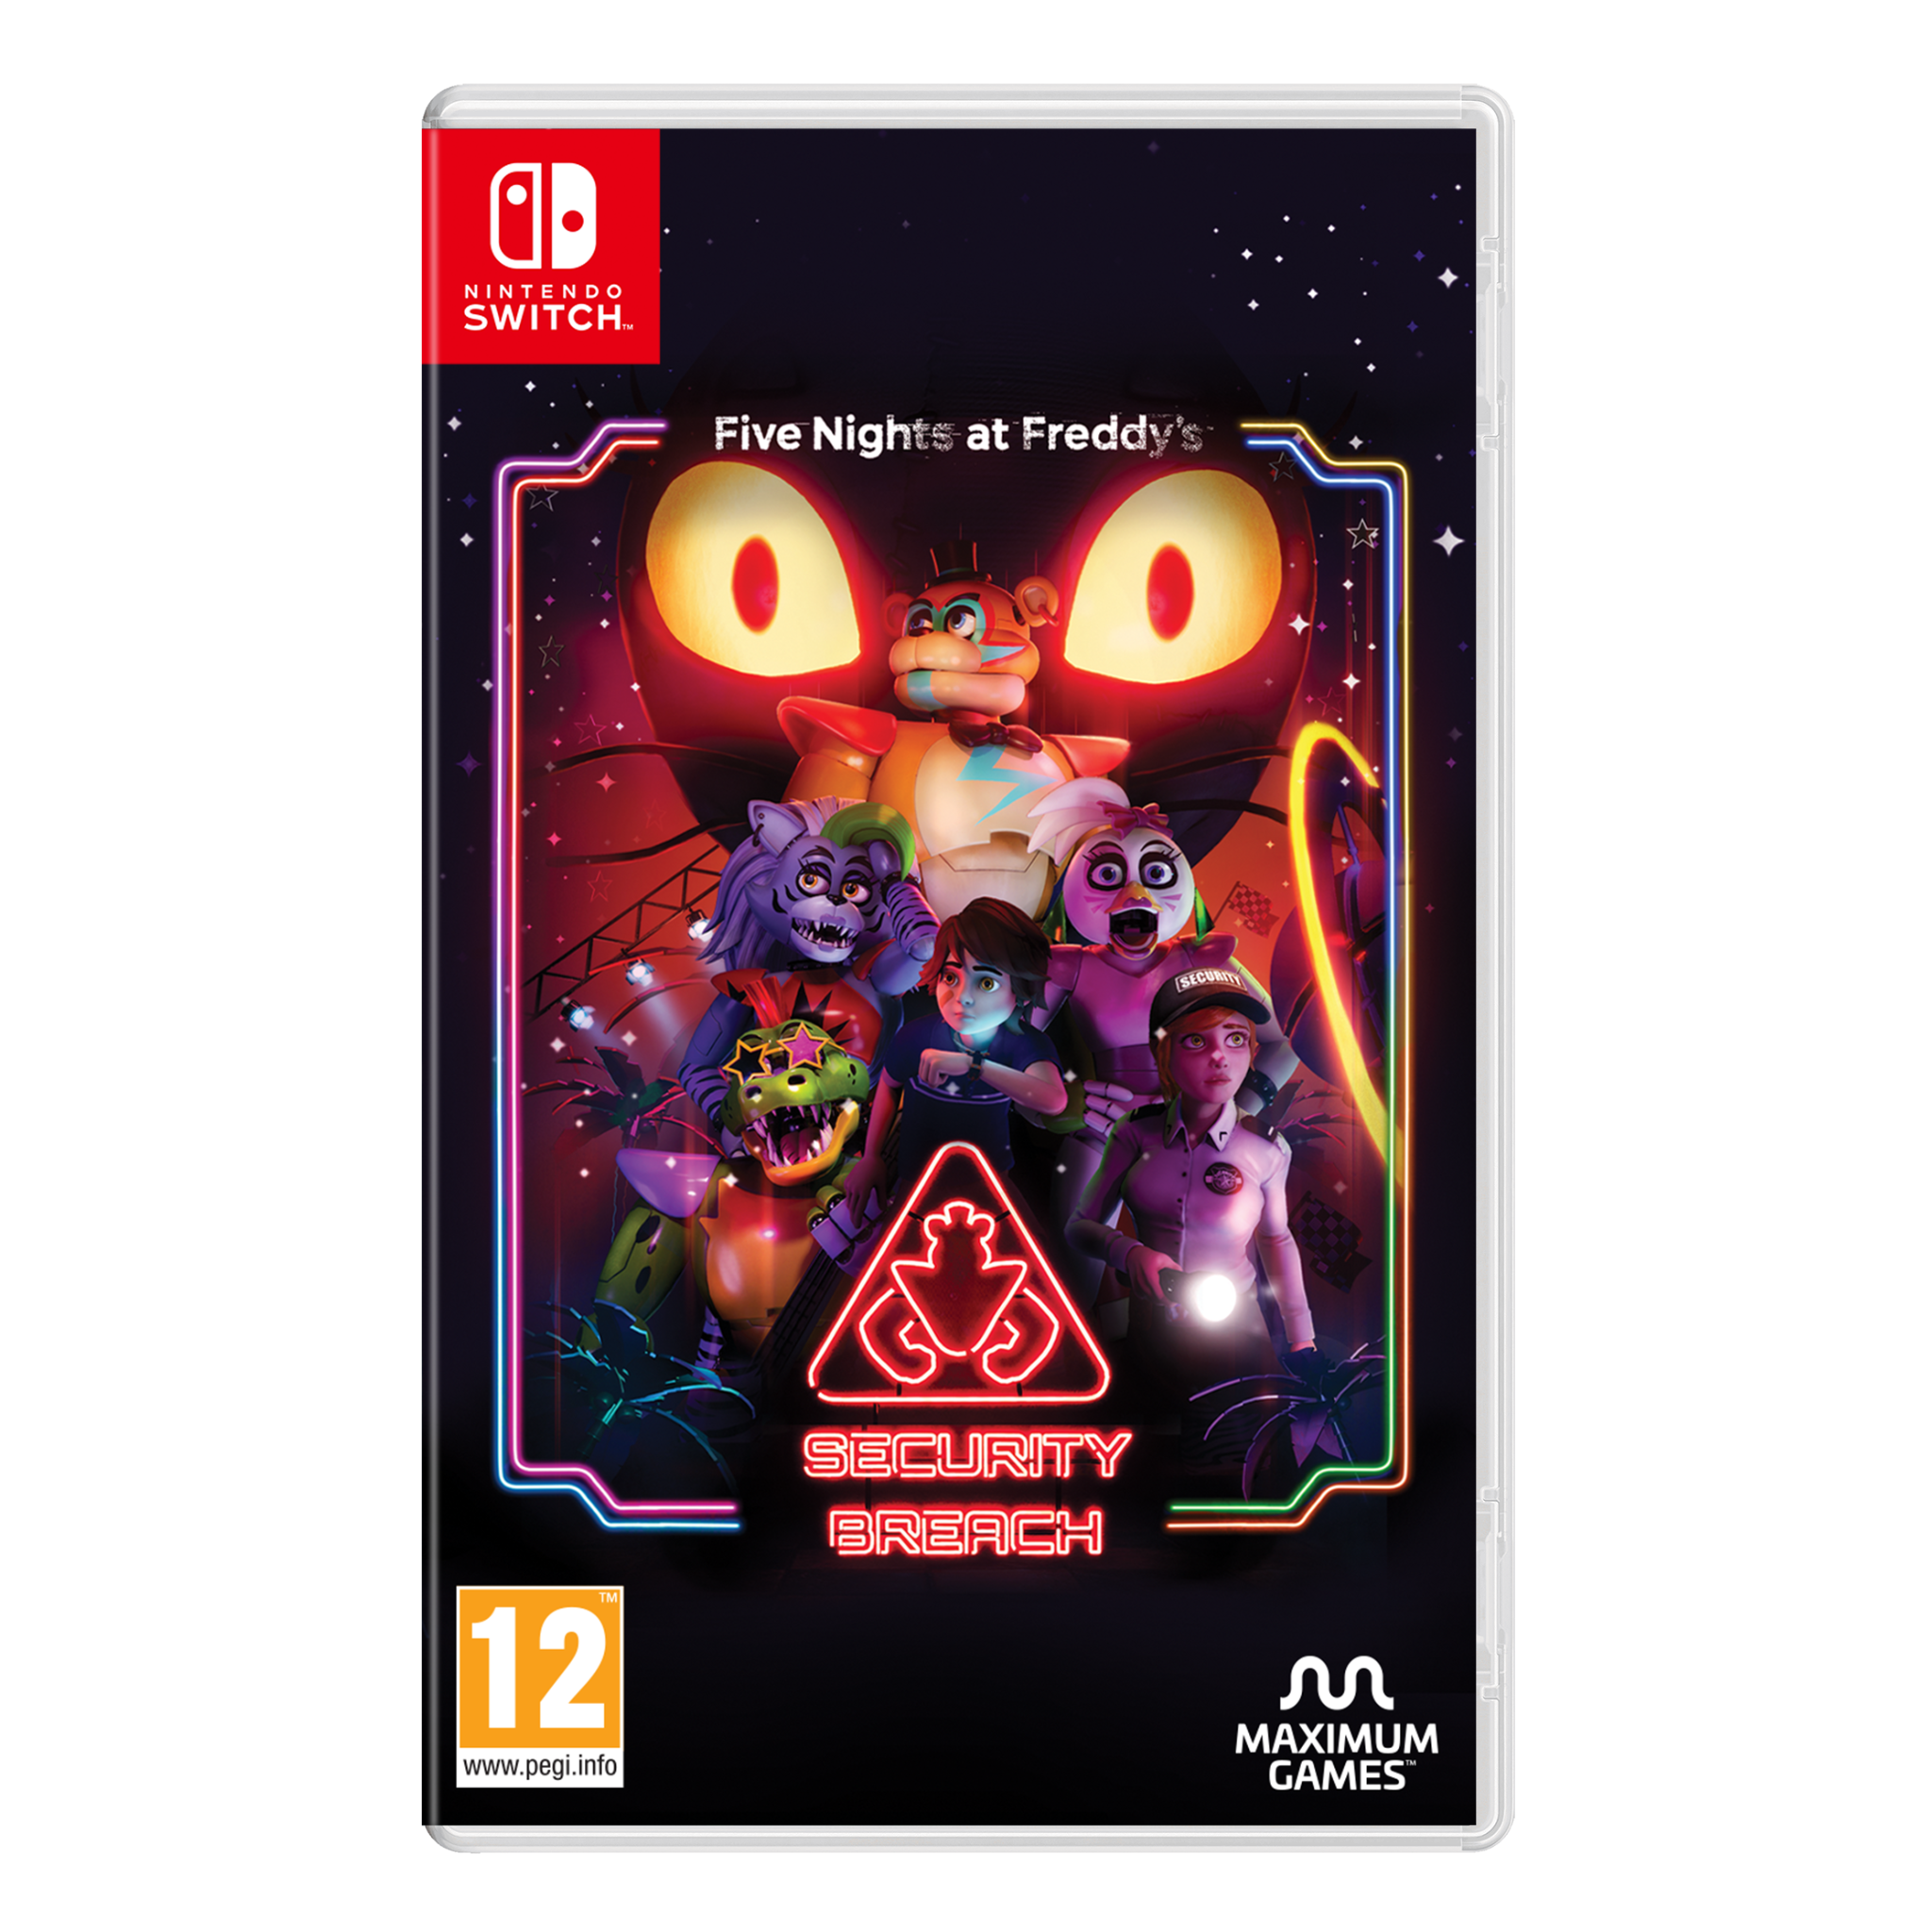 Five Nights at Freddy's: Security Breach Nintendo Switch